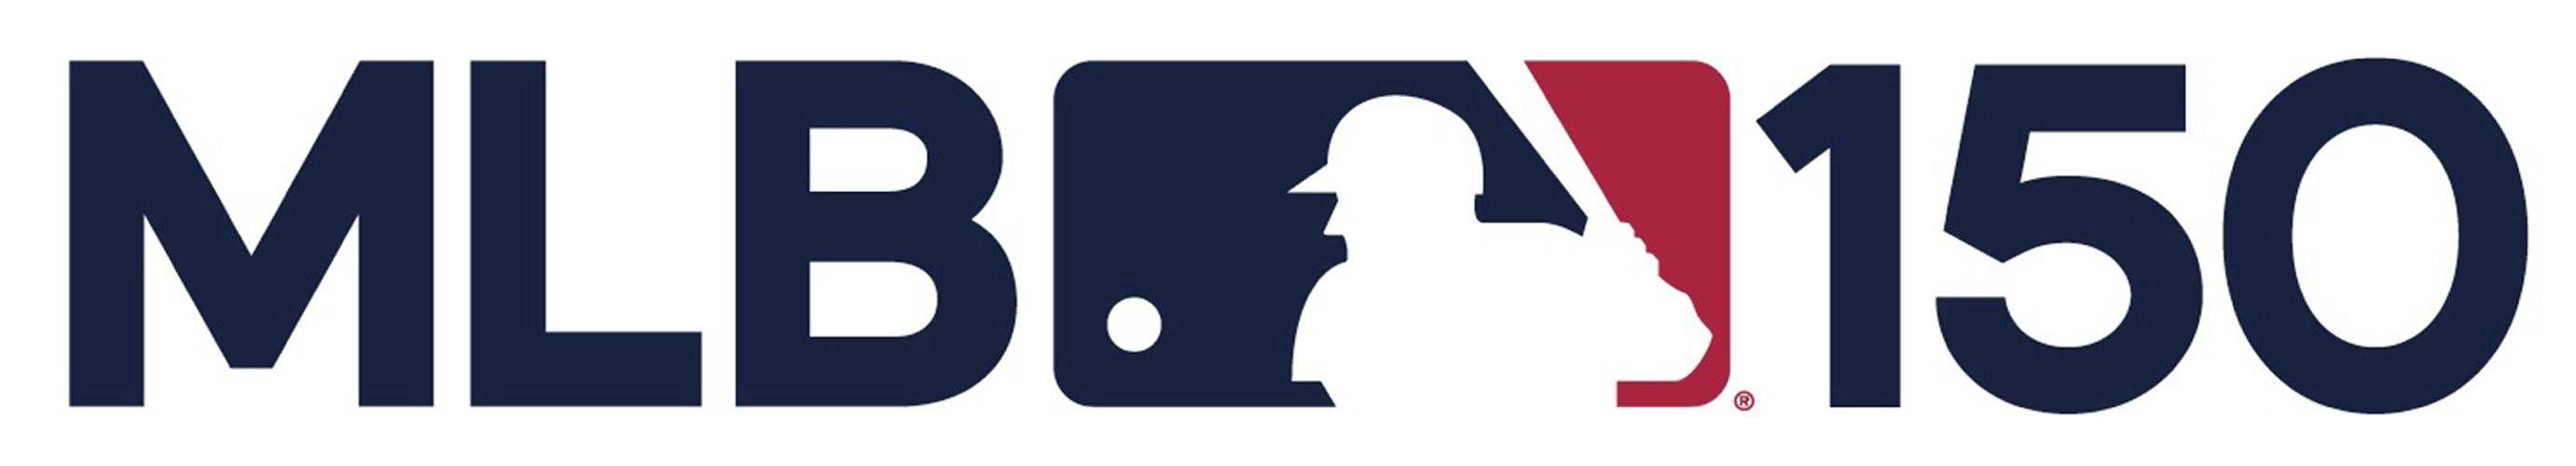 MLB Logo - MLB's 150th anniversary logo features silhouetted batter